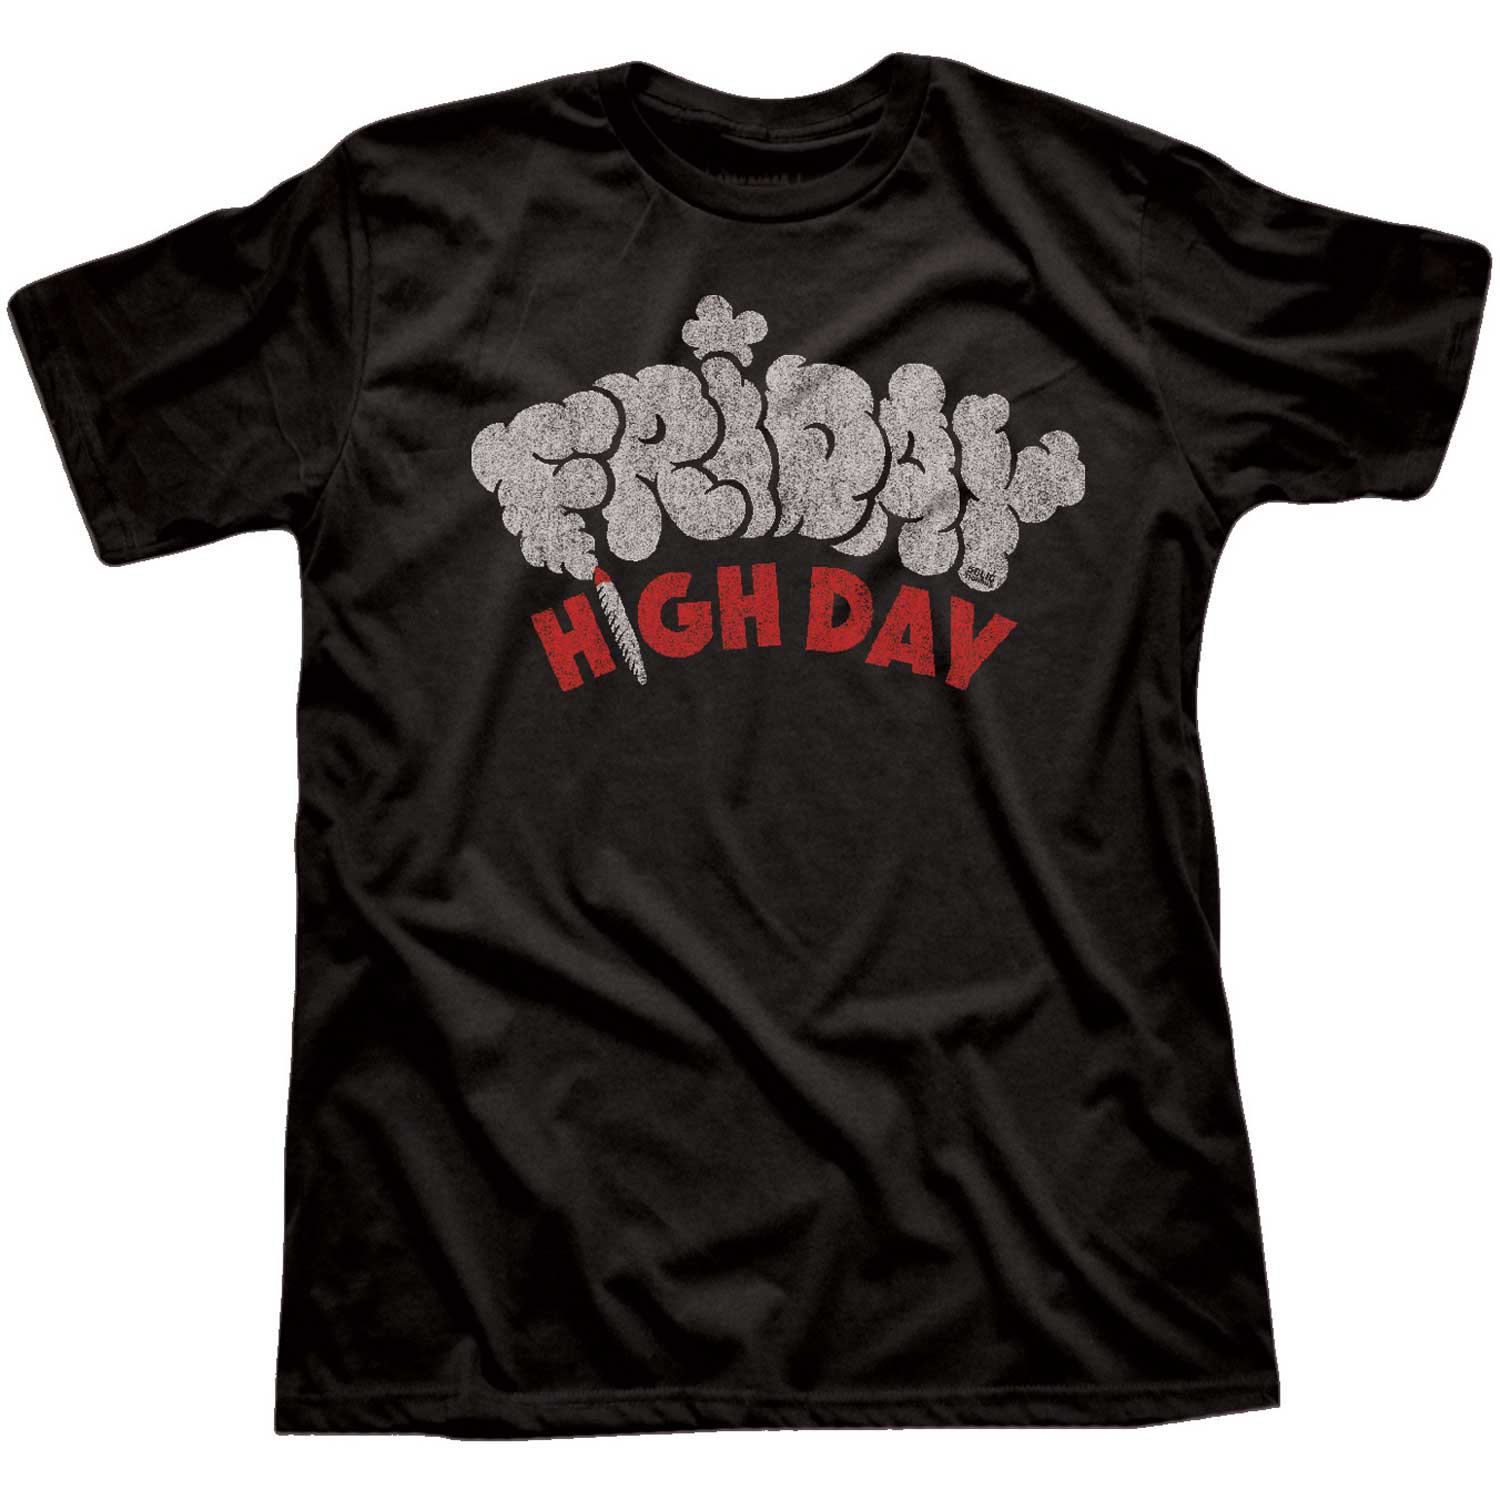 Men's Friday High Day Funny 420 Graphic T-Shirt | Vintage Marijuana Tee | Solid Threads